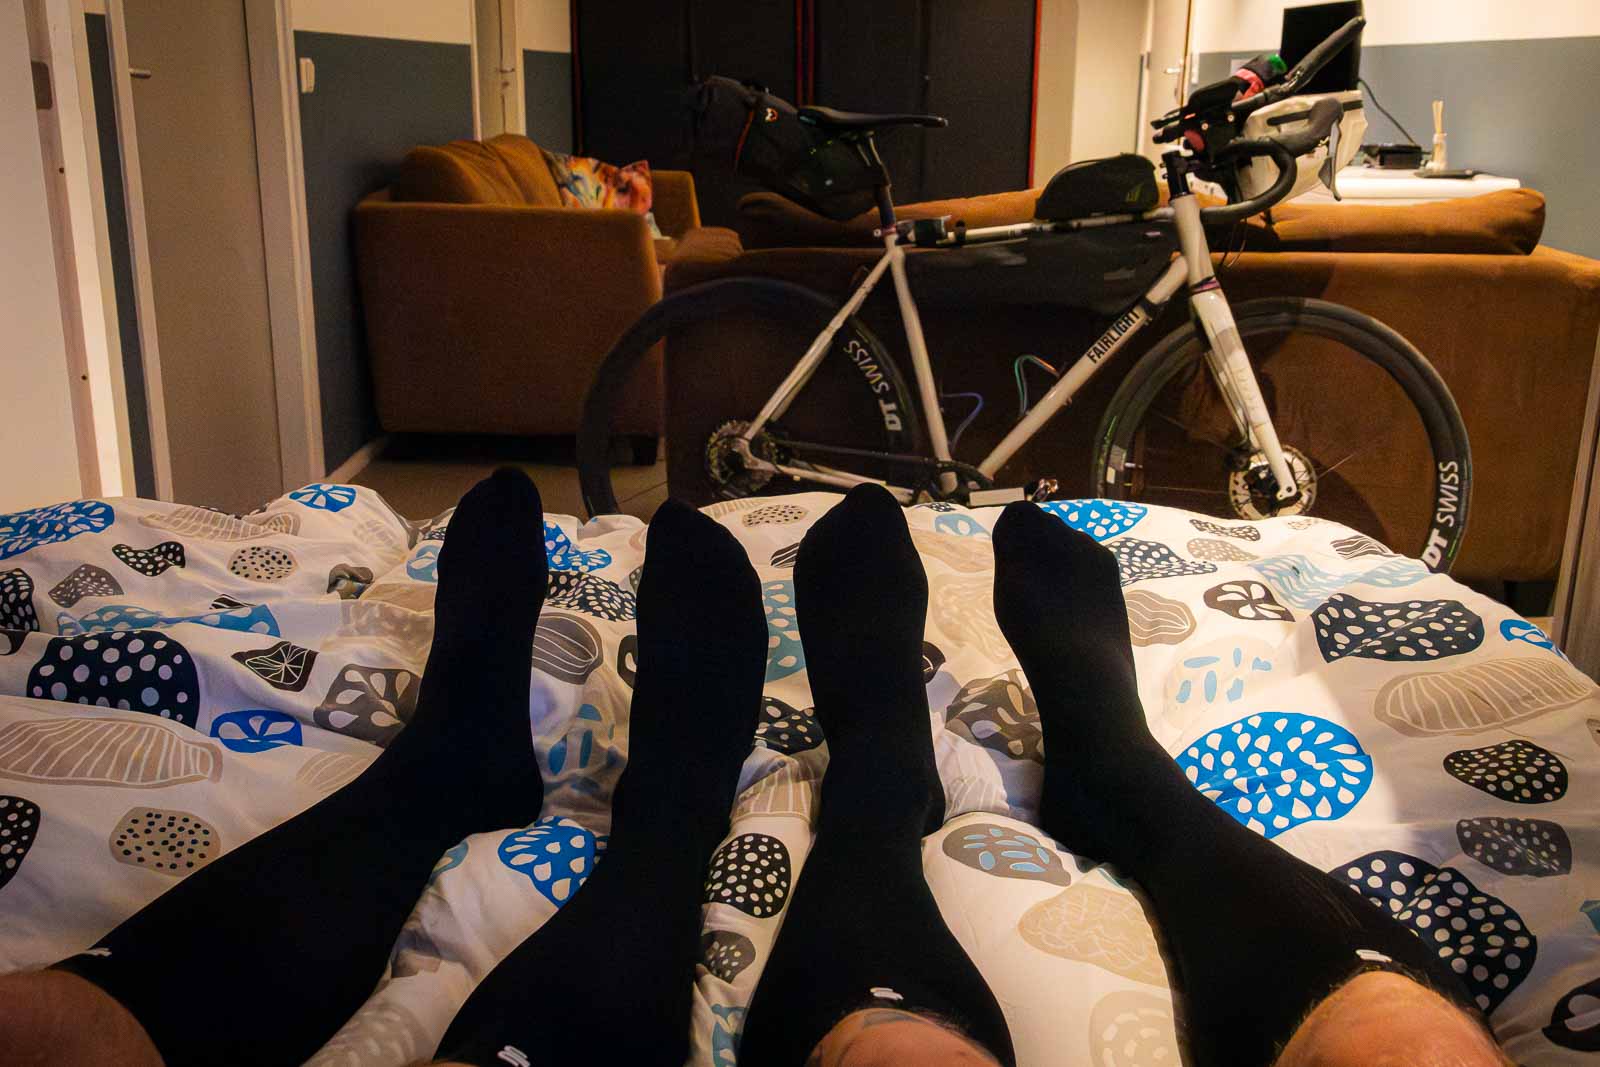 Two participants in the Race around the Netherlands lie in bed wearing recovery socks after an exhausting day.